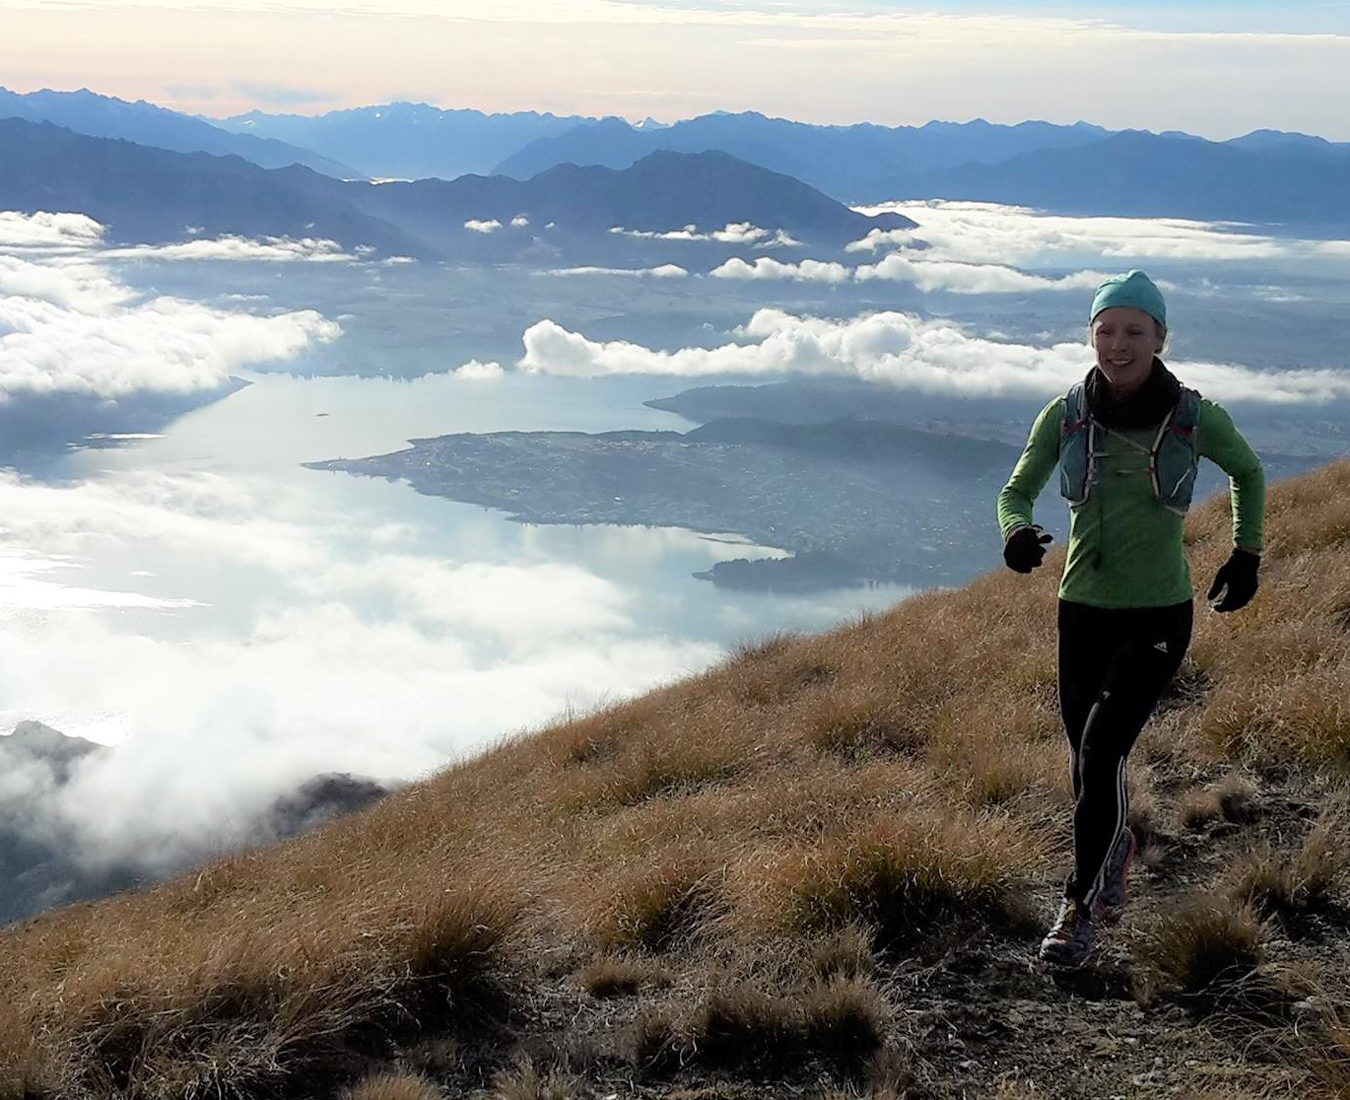 Training for an expedition can include trail running, here a runner is in the hills above Lake Wanaka